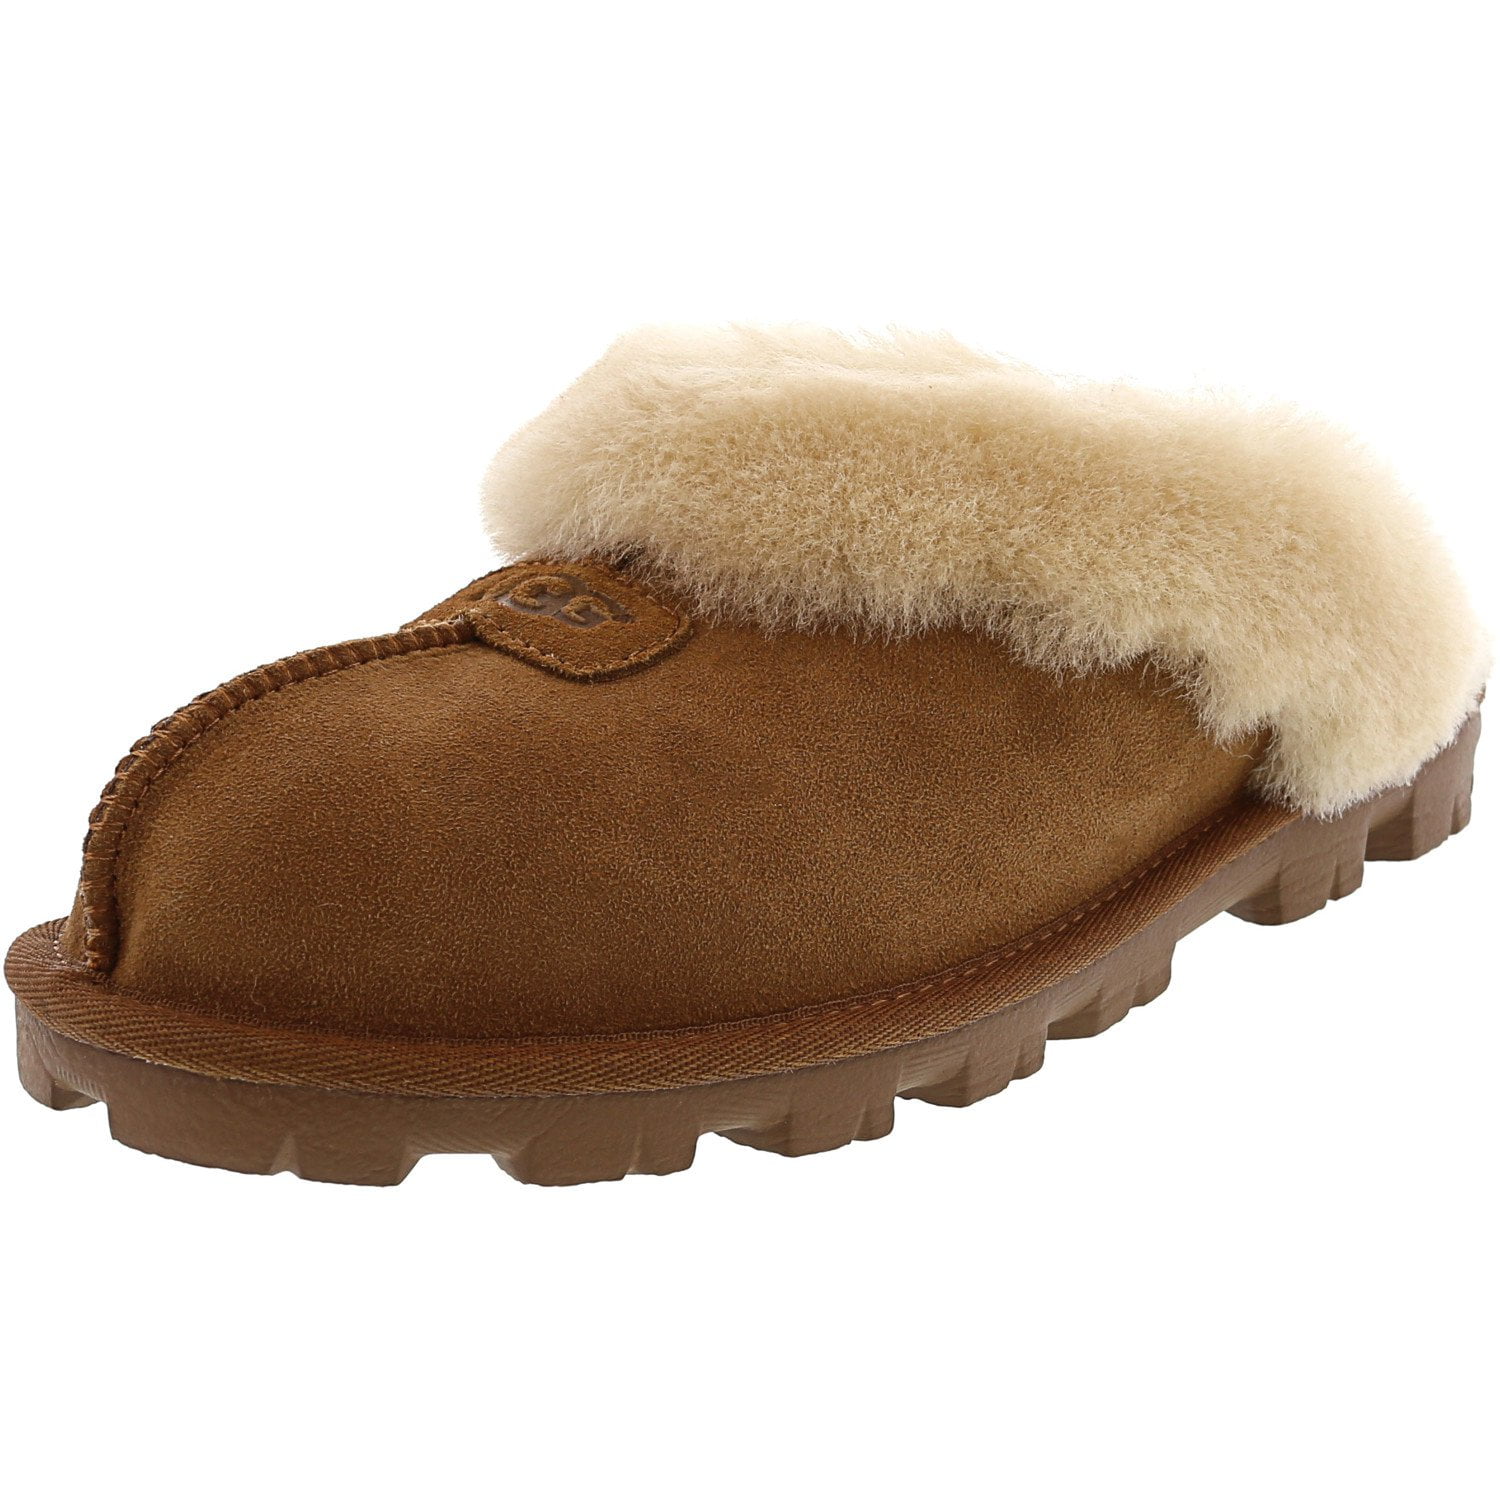 ugg women's slippers size 7